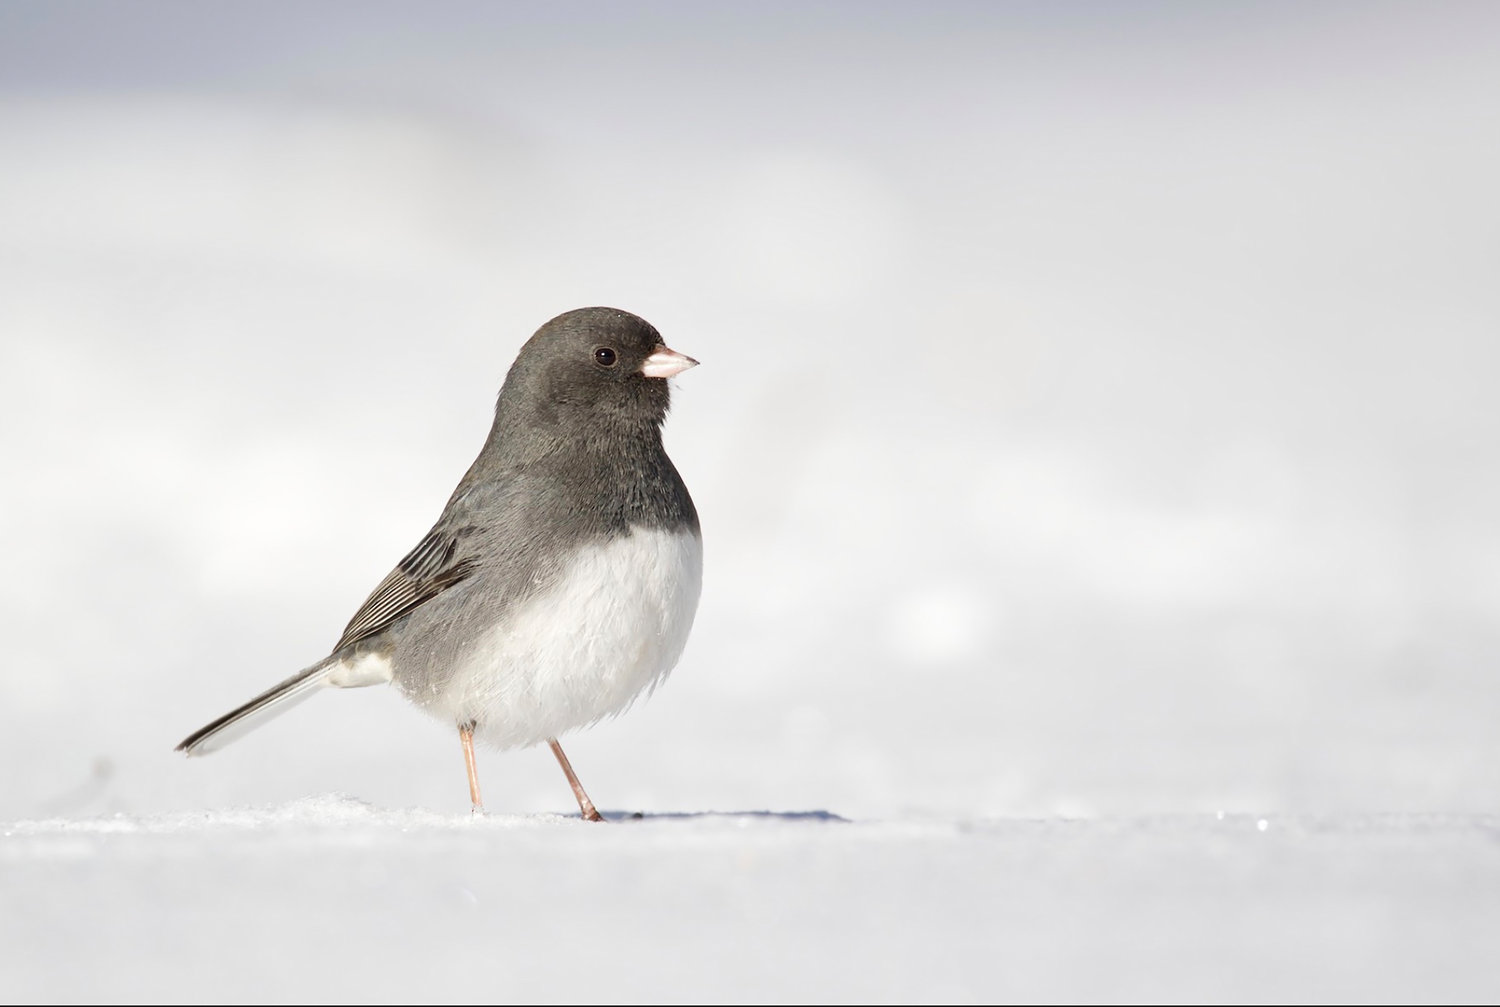 This image provided by Macaulay Library/Cornell Lab of Ornithology shows a dark-eyed junco. The dark-eyed junco, one of the most common forest birds in North America, is among species likely to be spotted by participants in the Great Backyard Bird Watch, running Feb. 17-20. The global count by volunteers helps scientists studying the decline of bird populations worldwide.